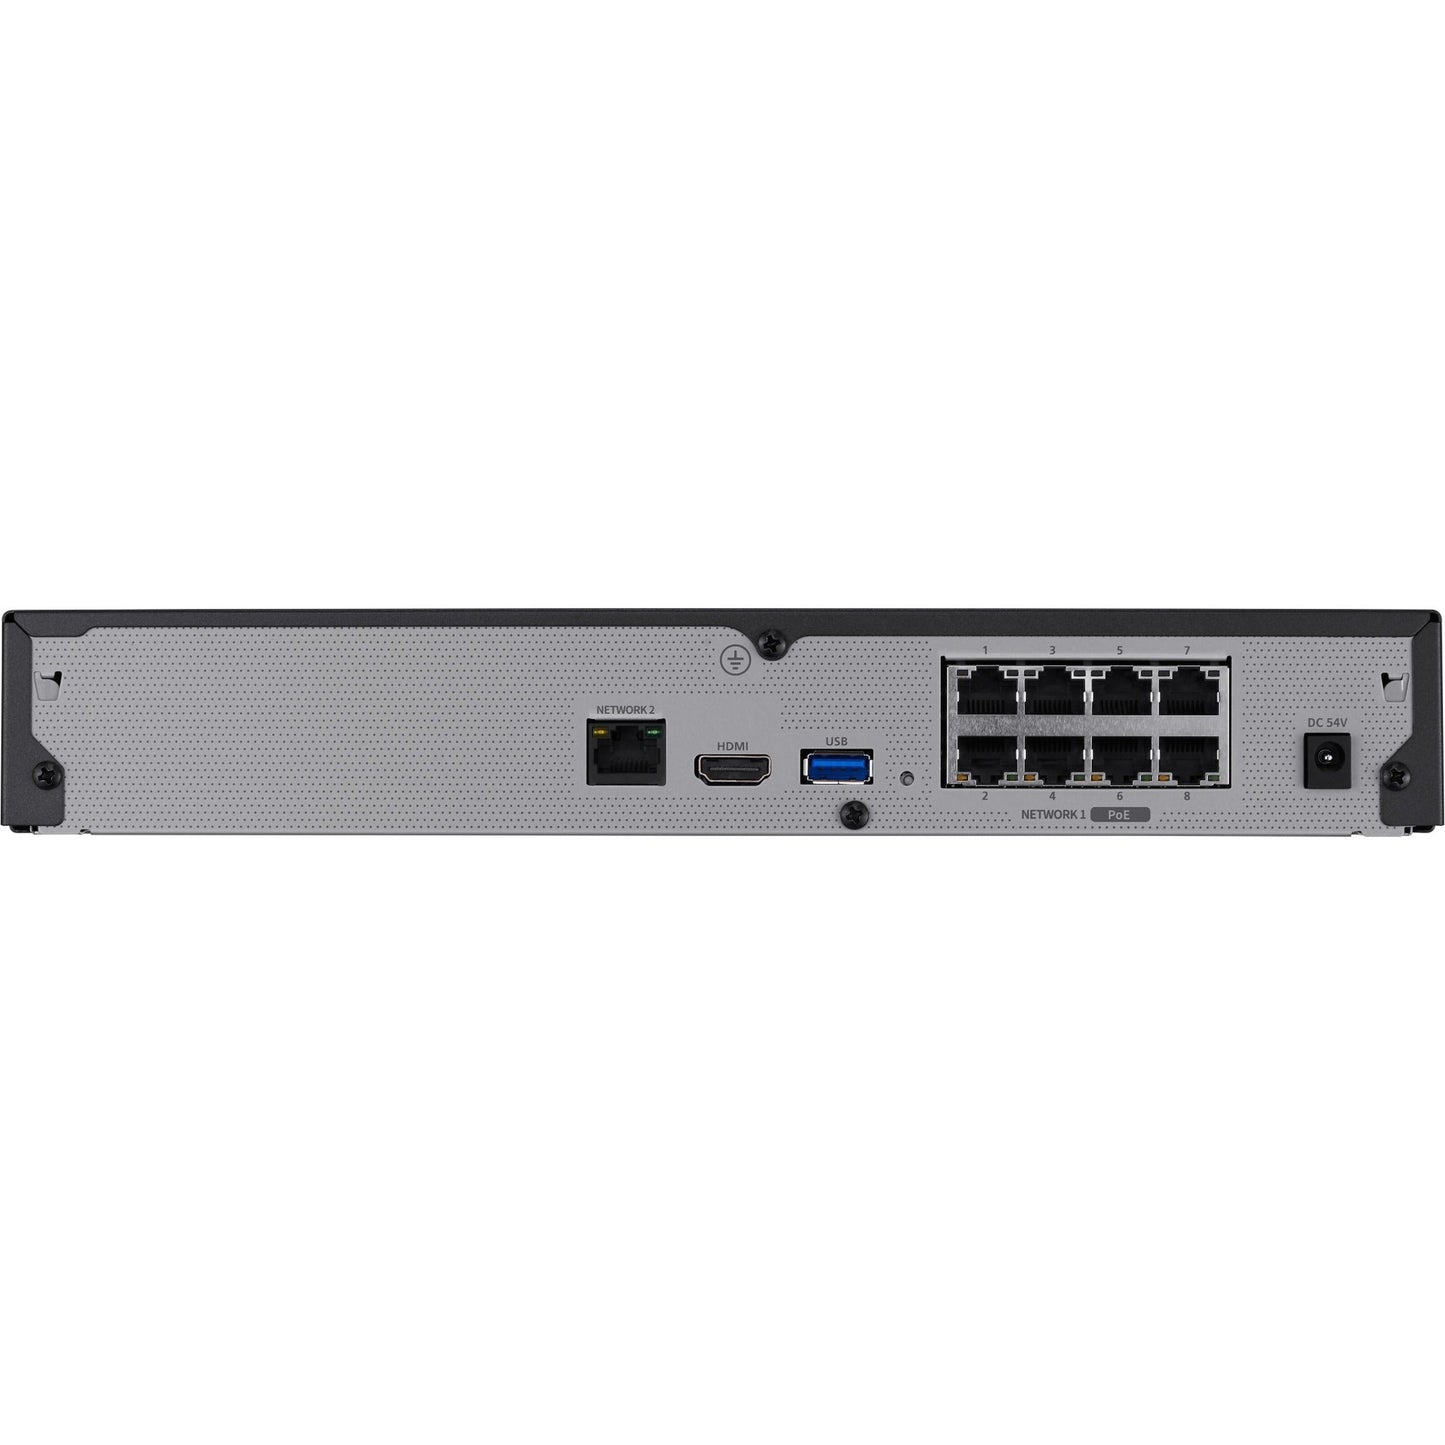 Wisenet 8Channel 8MP NVR with PoE switch - 4 TB HDD